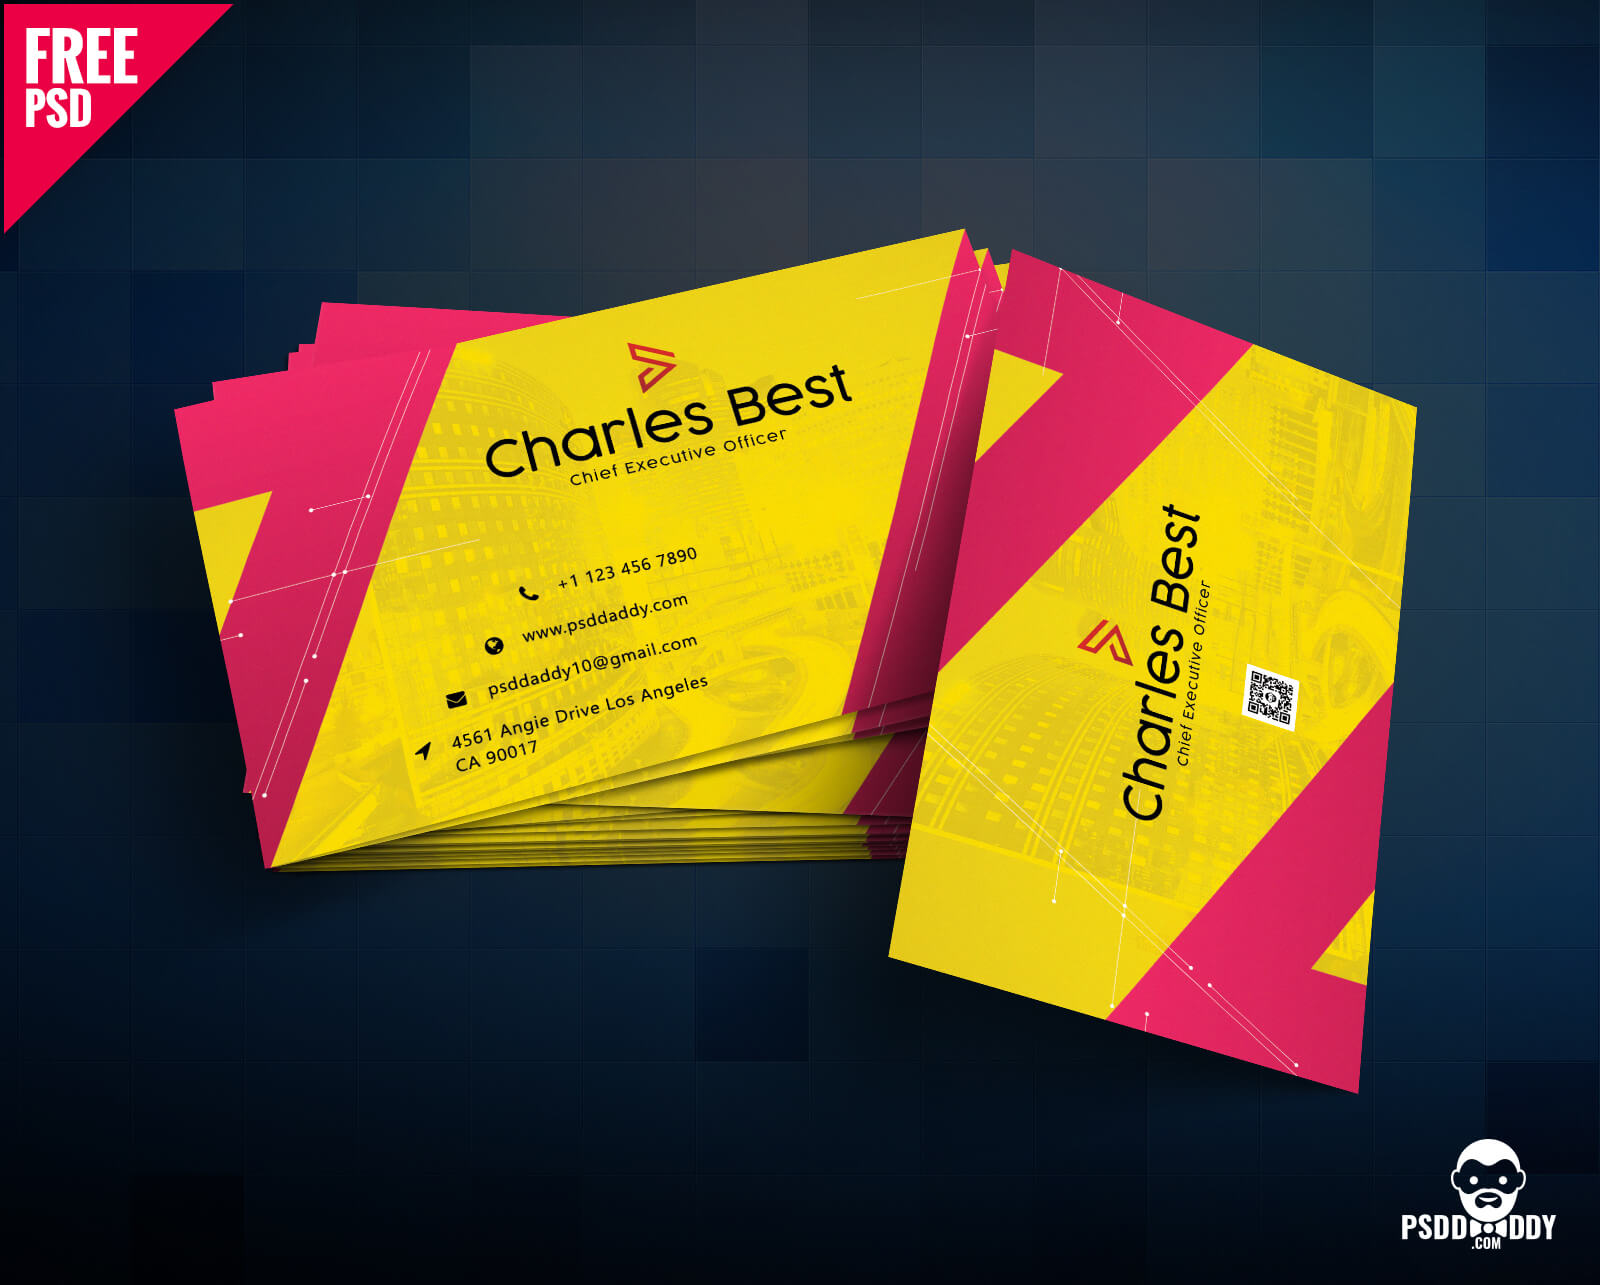 Download] Creative Business Card Free Psd | Psddaddy Inside Free Complimentary Card Templates